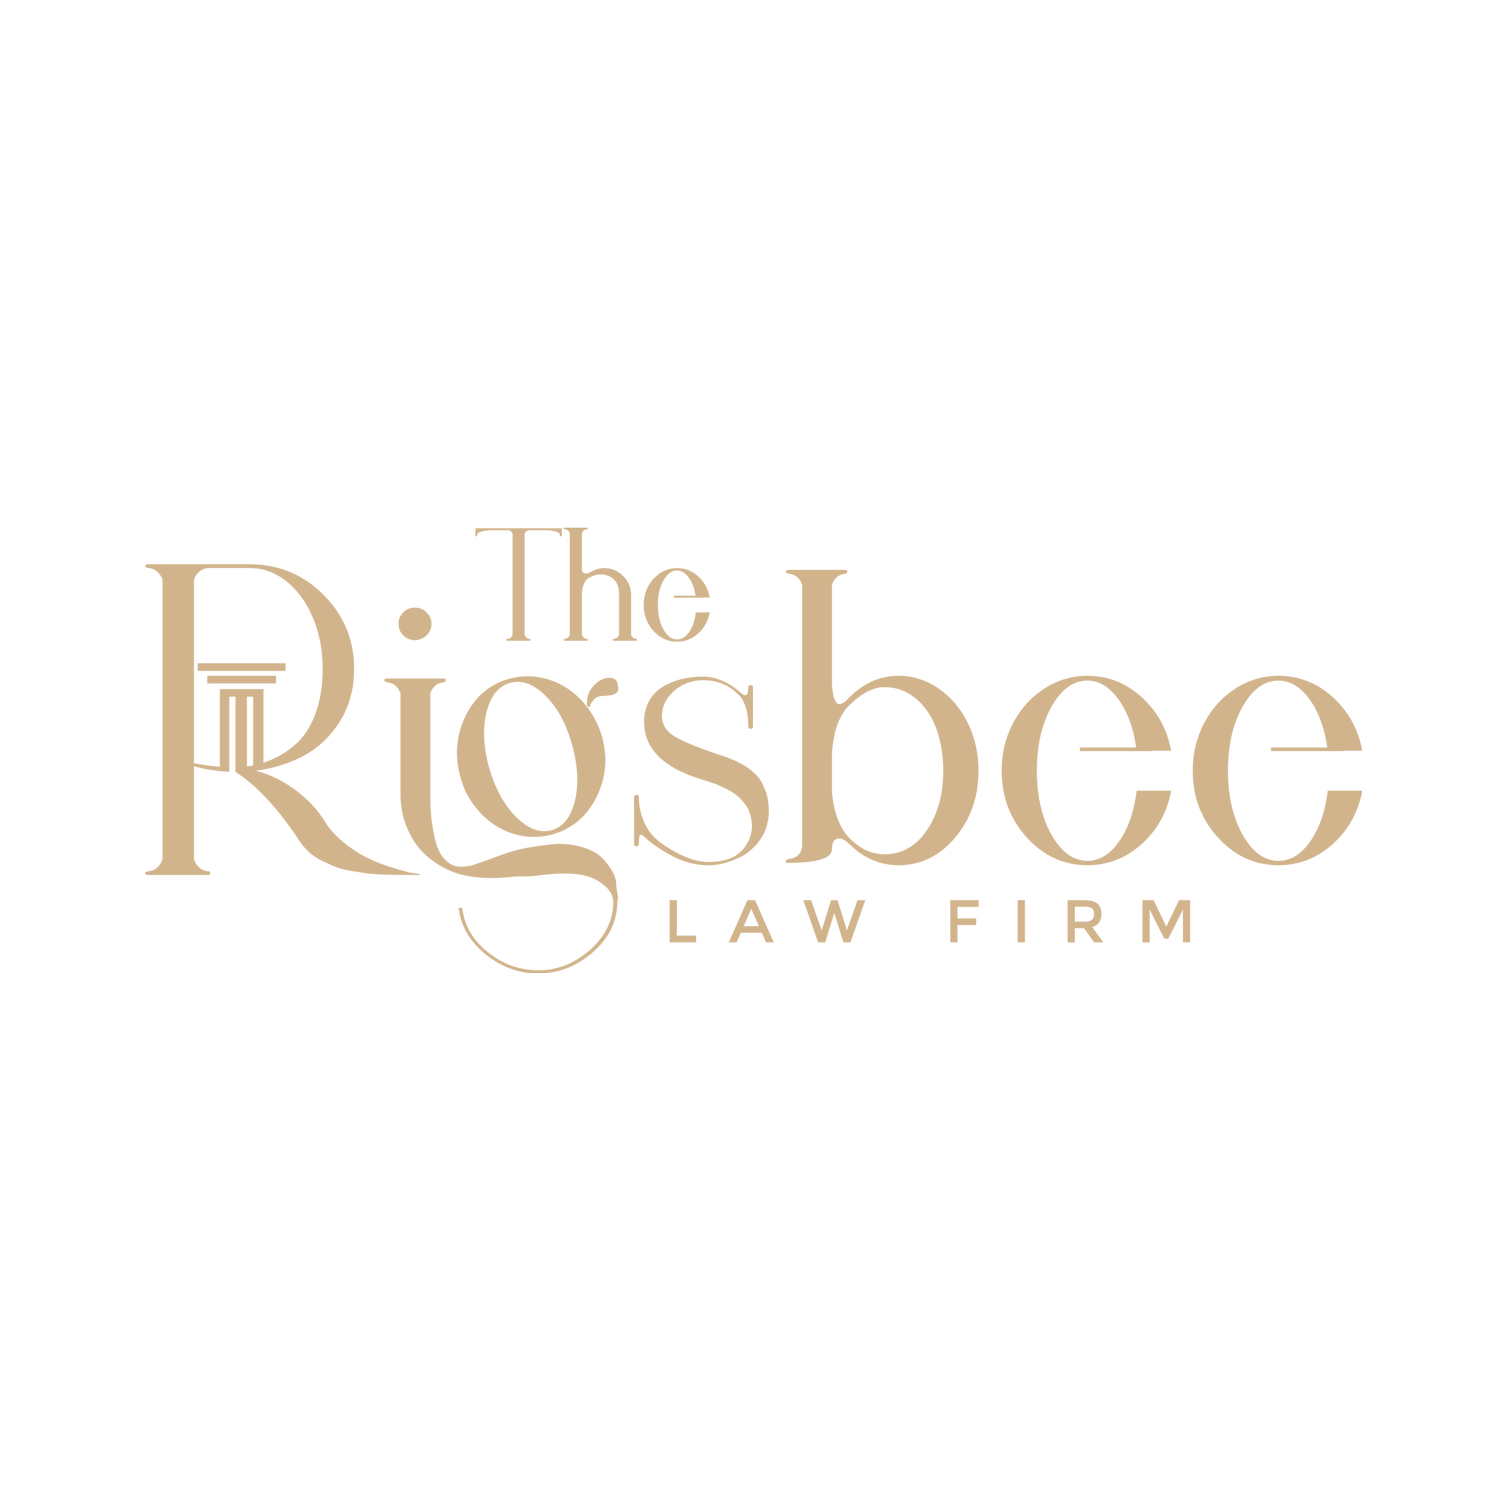 The Rigsbee Law Firm